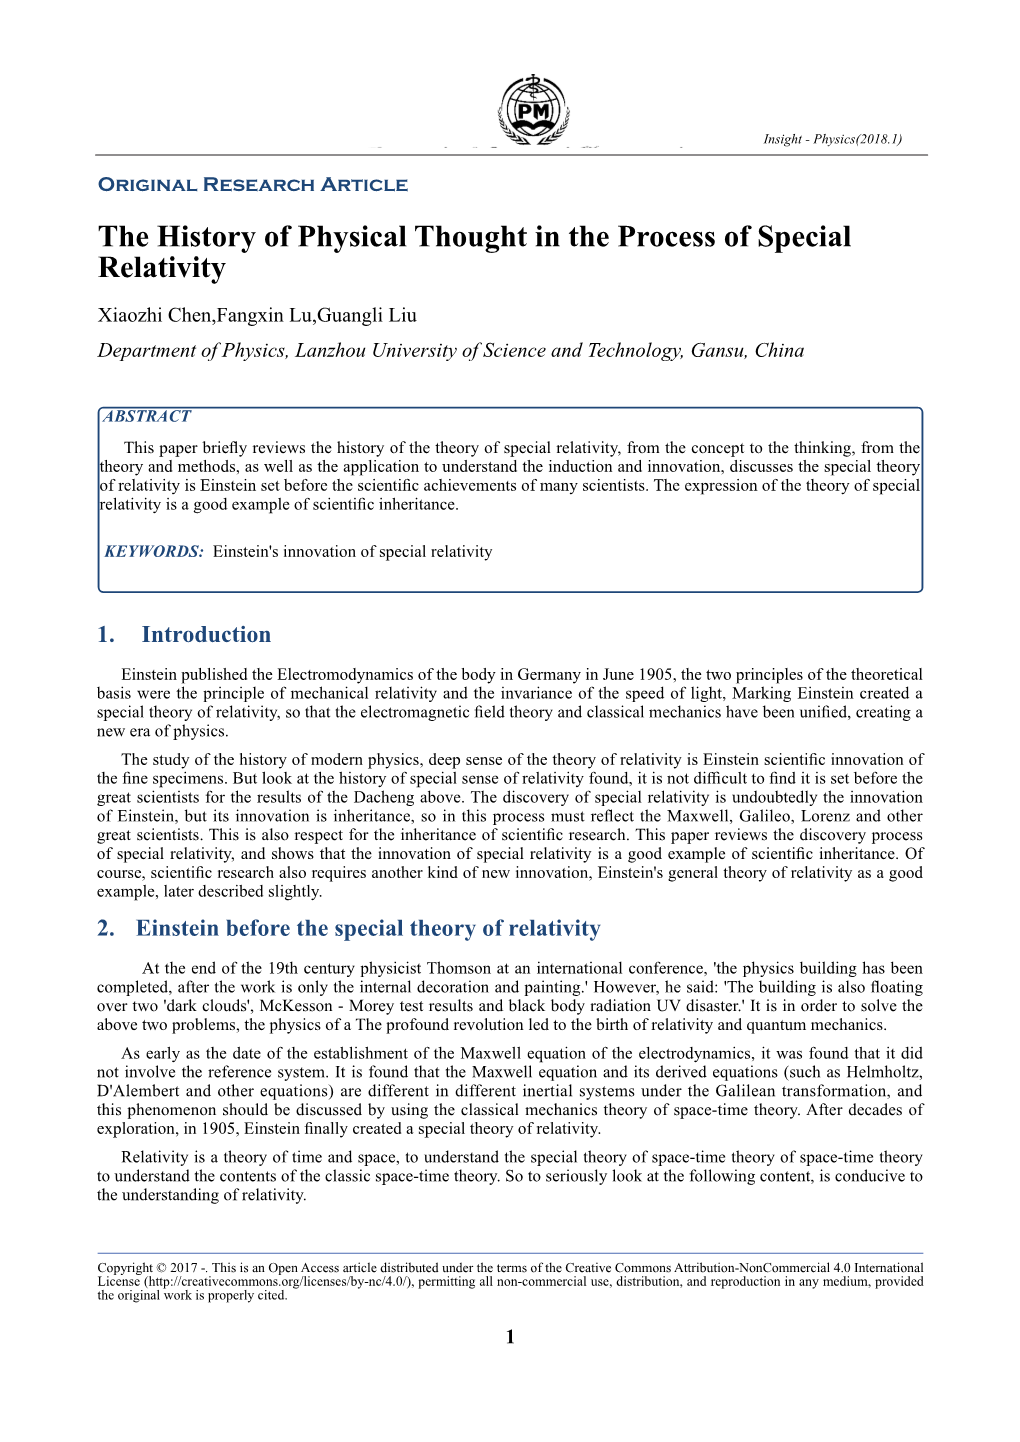 The History of Physical Thought in the Process of Special Relativity